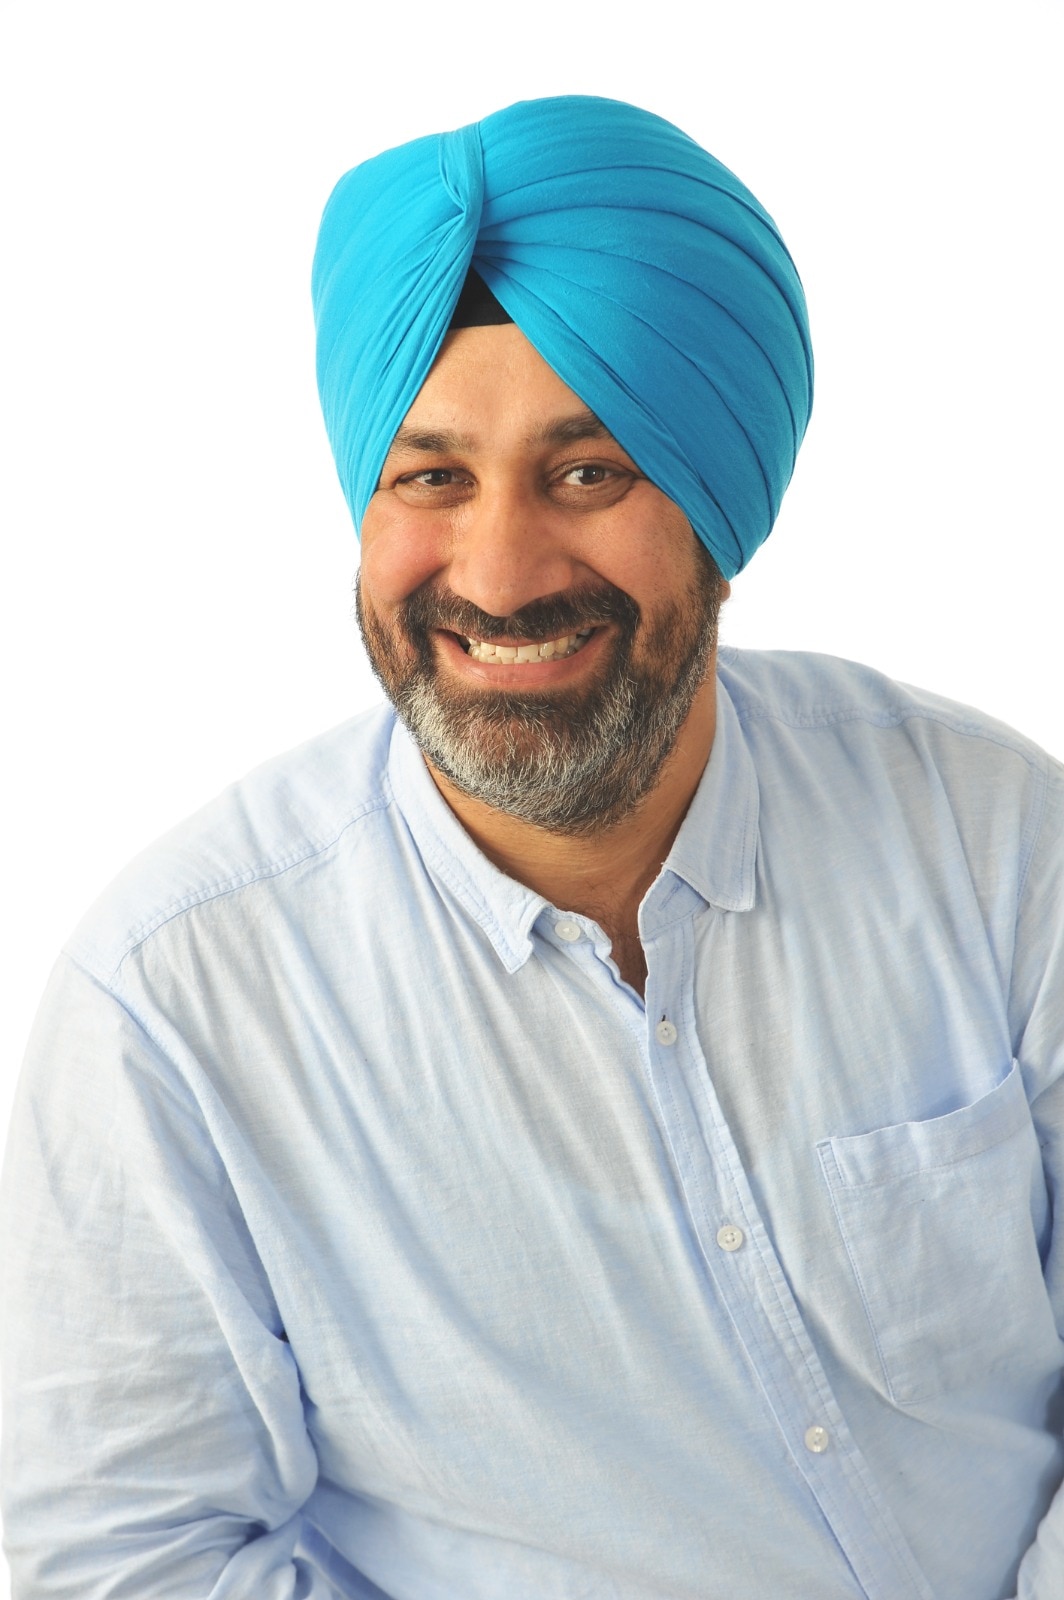 Manjit Singh Lally, newly elected councillor from Griffith